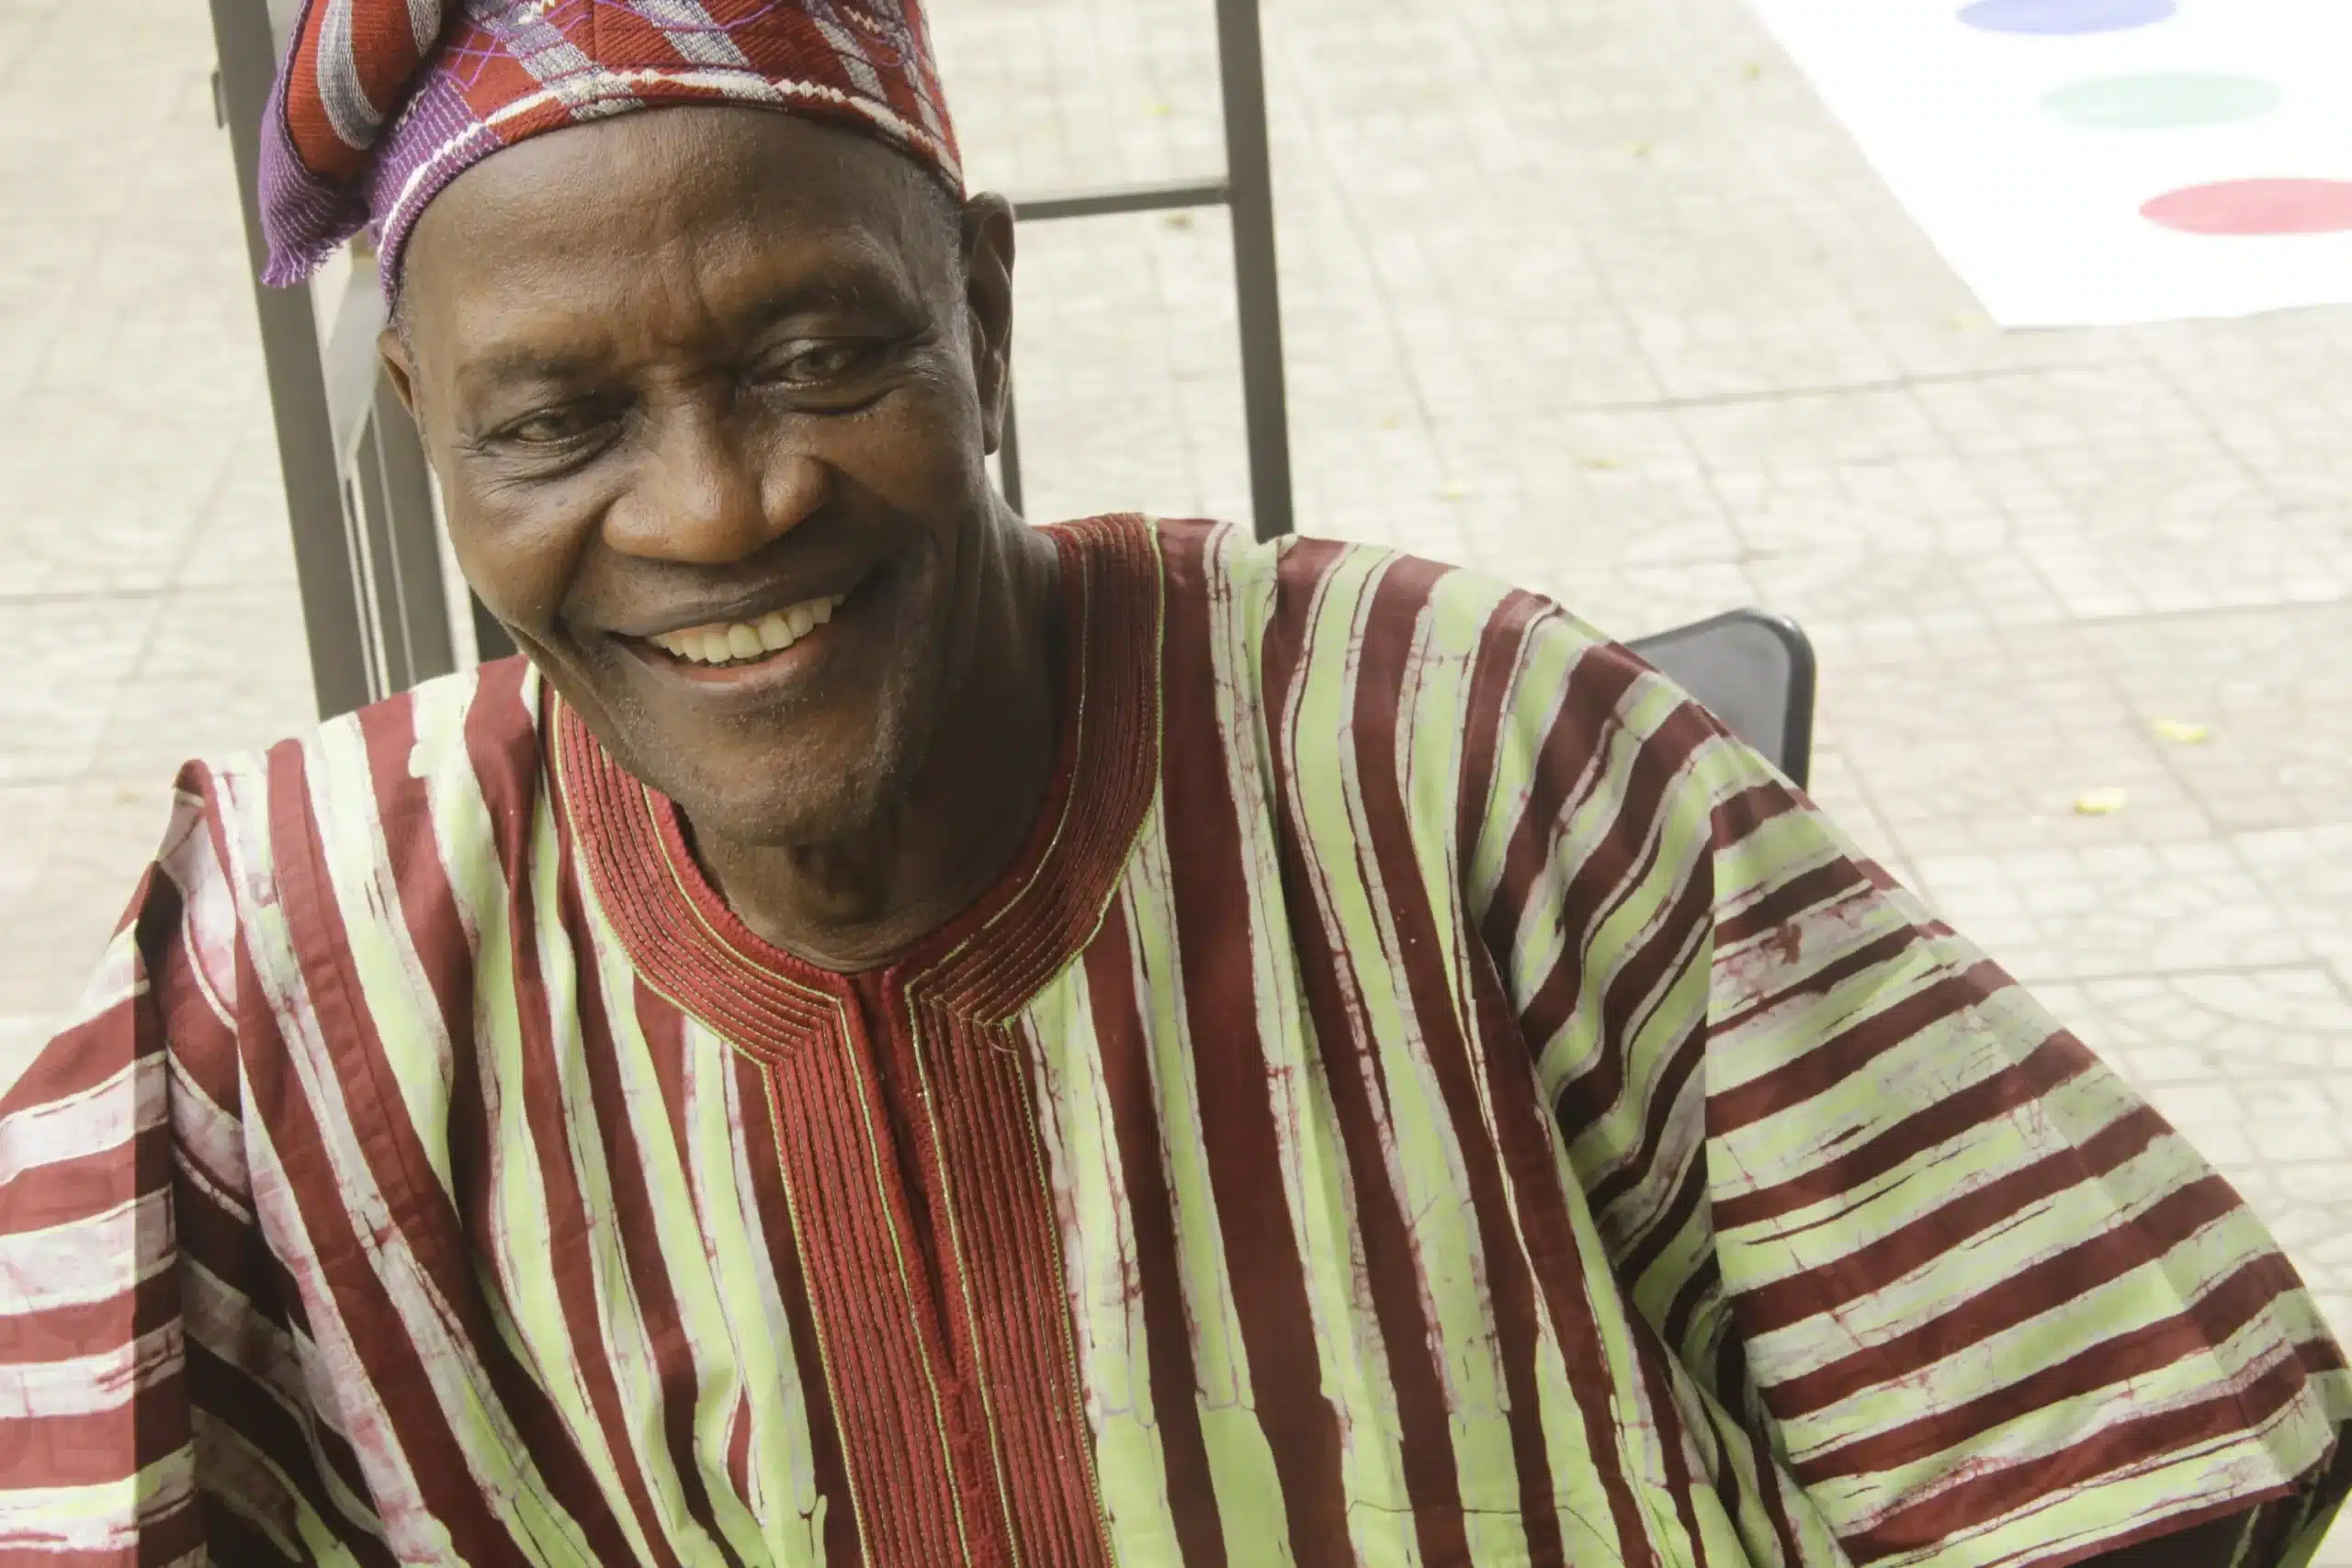 actor, dramatist, playwright, Jimi Solanke, dead